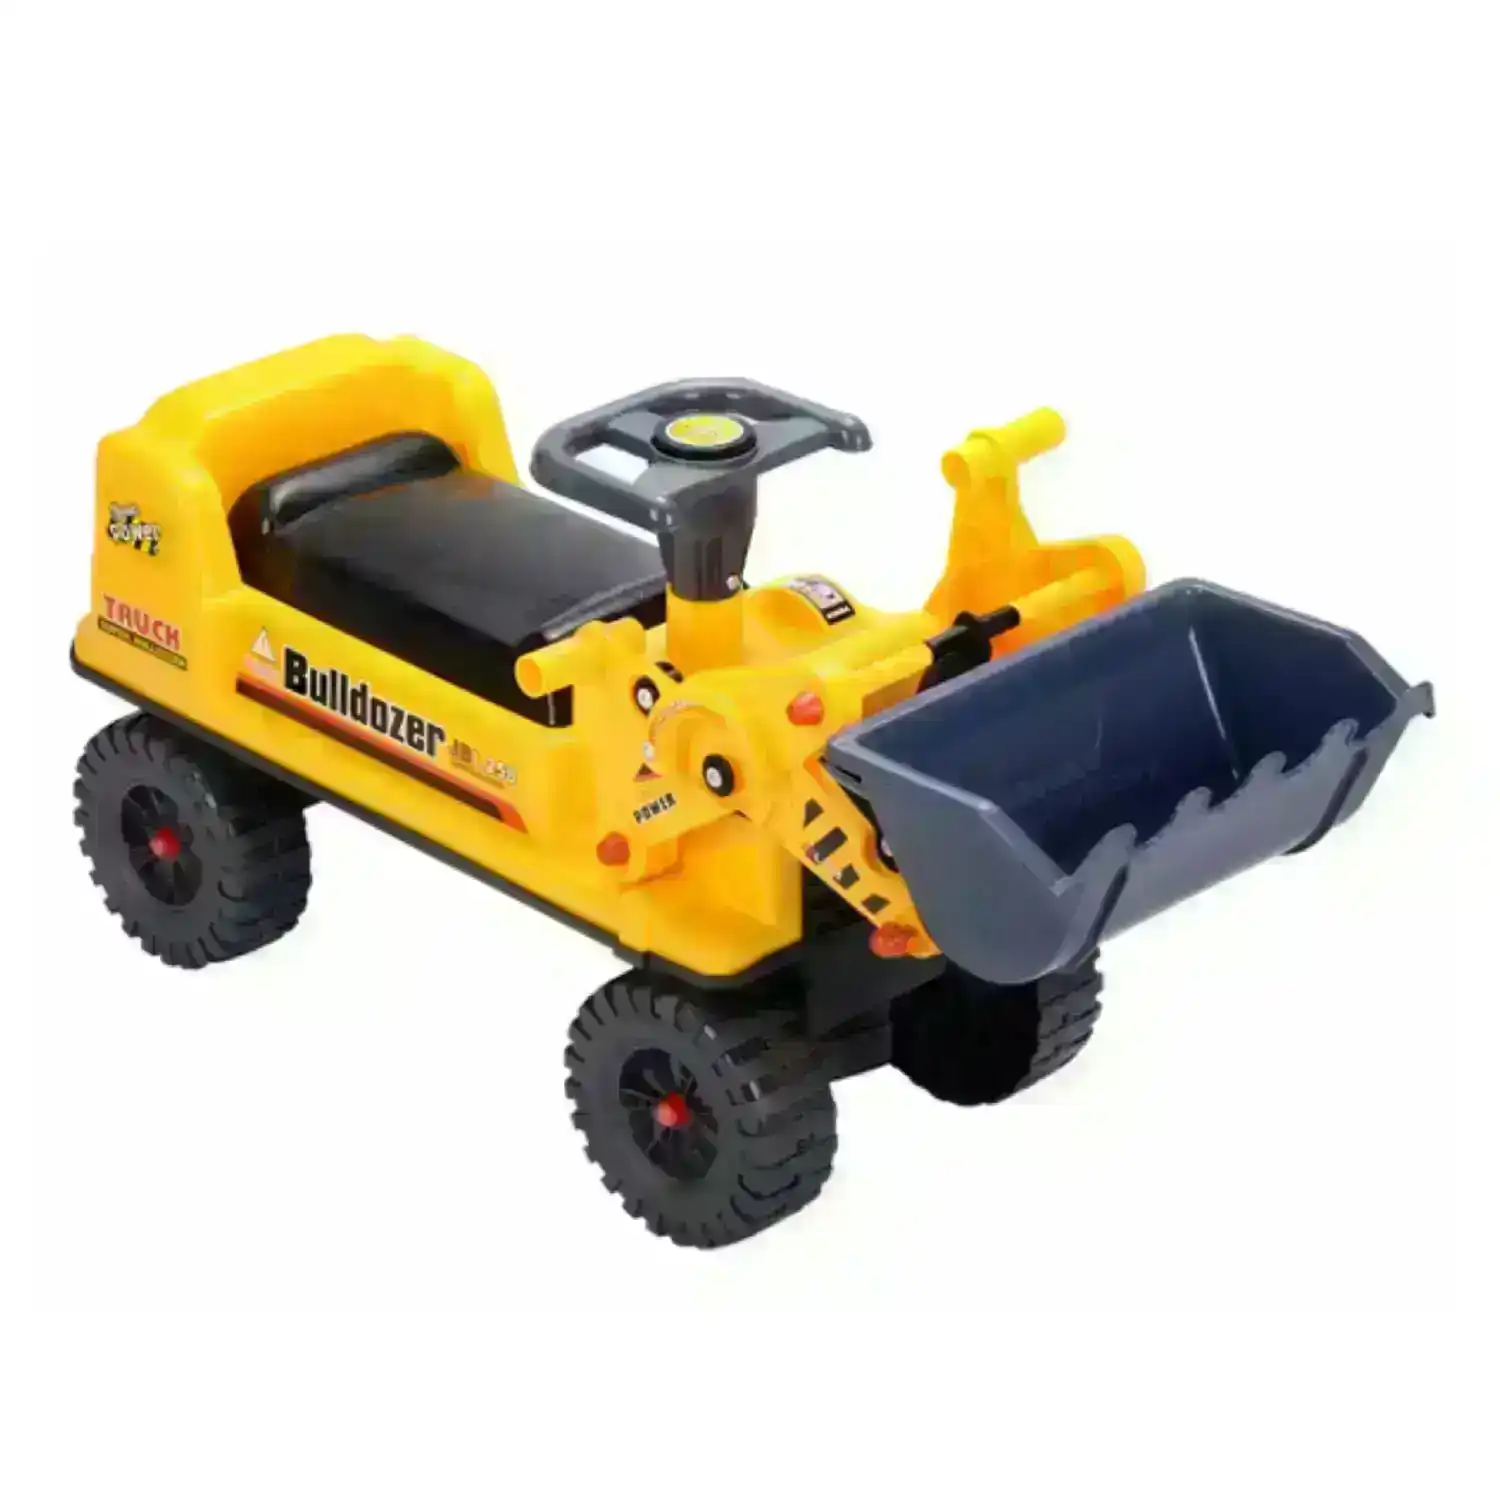 Gominimo Kids Ride On Bulldozer Digger Tractor Excavator Toy Car with Helmet